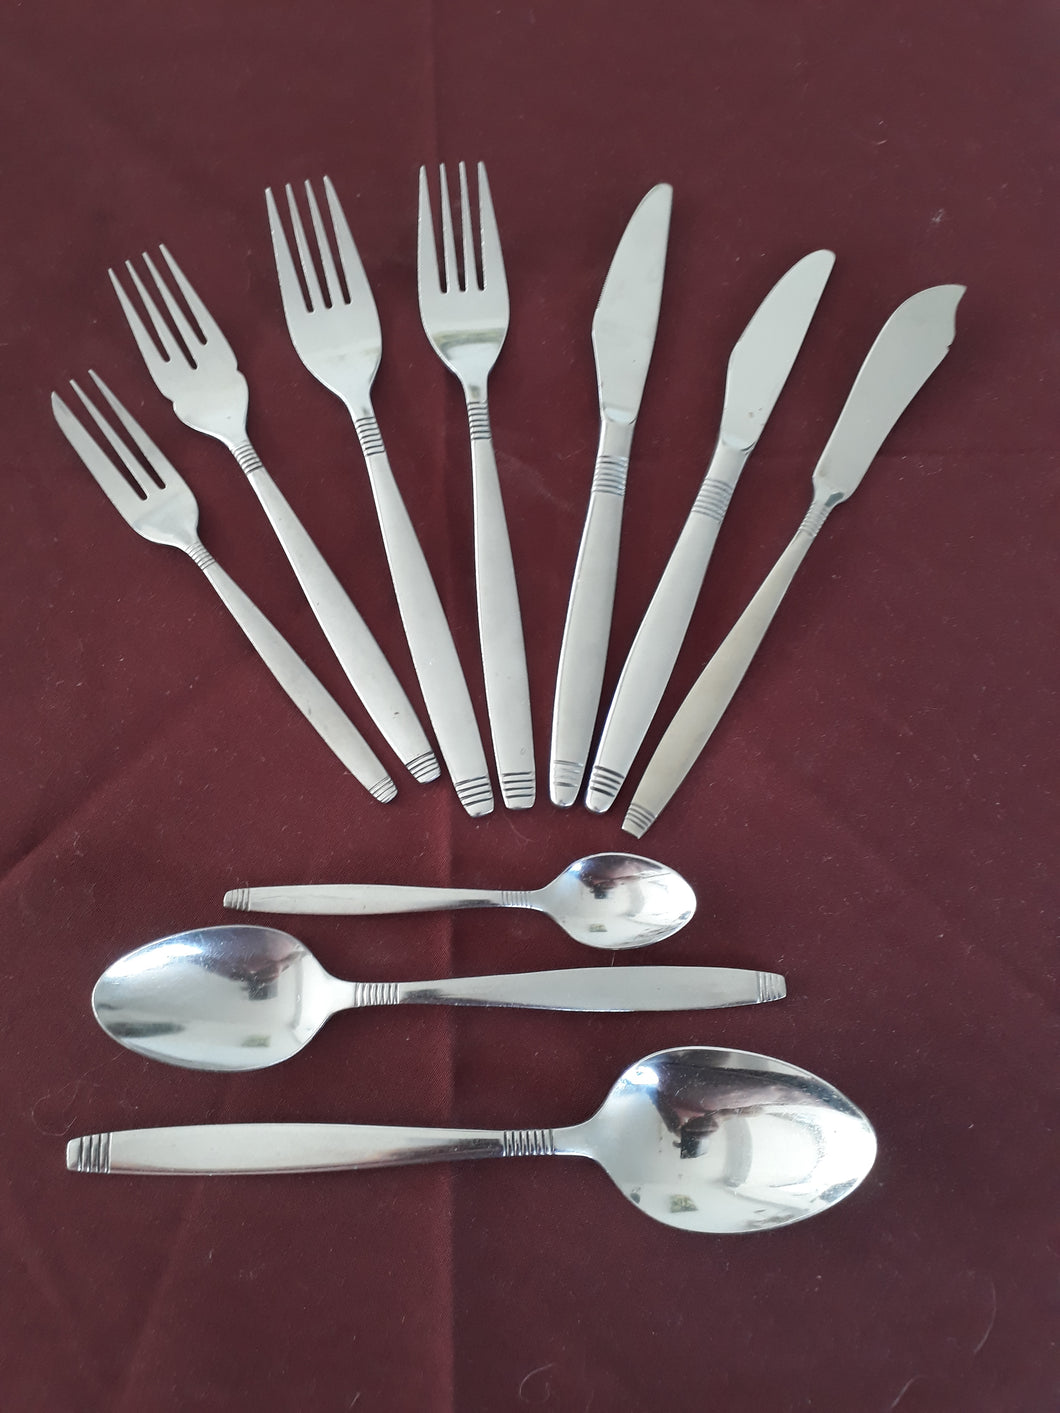 Dinner Fork from the Style cutlery collection